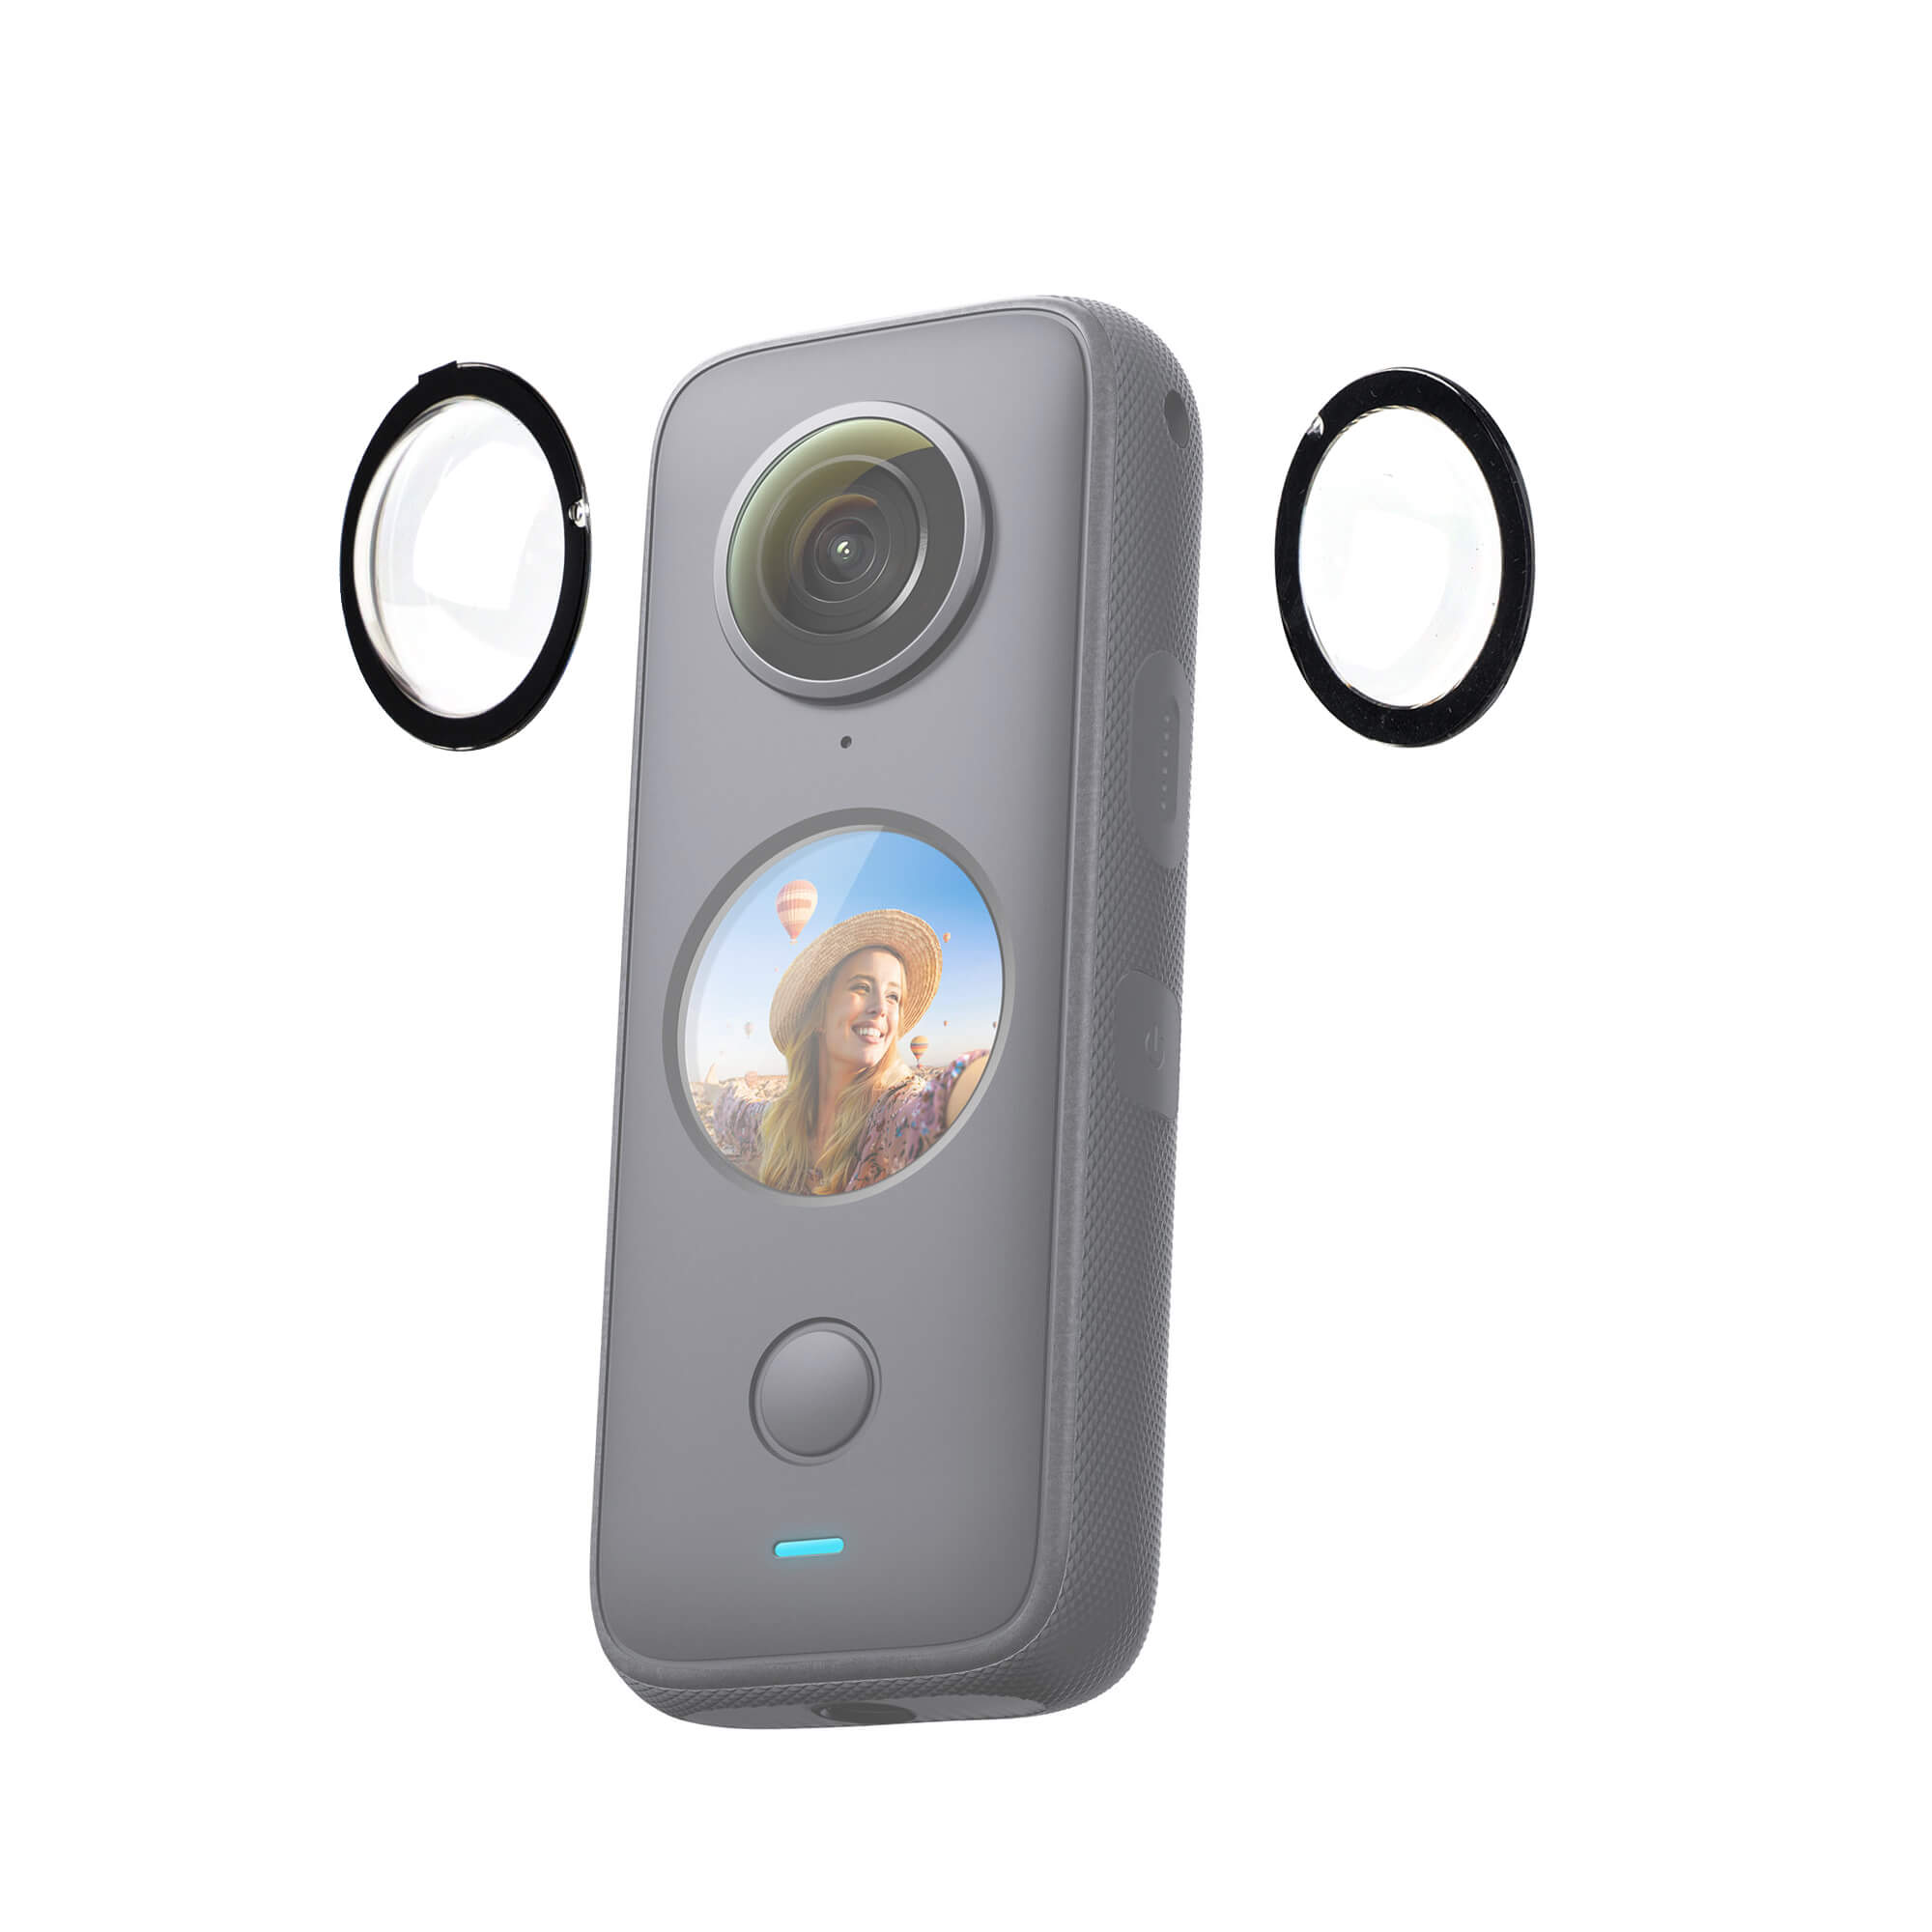 Insta360 ONE X2 Action Camera